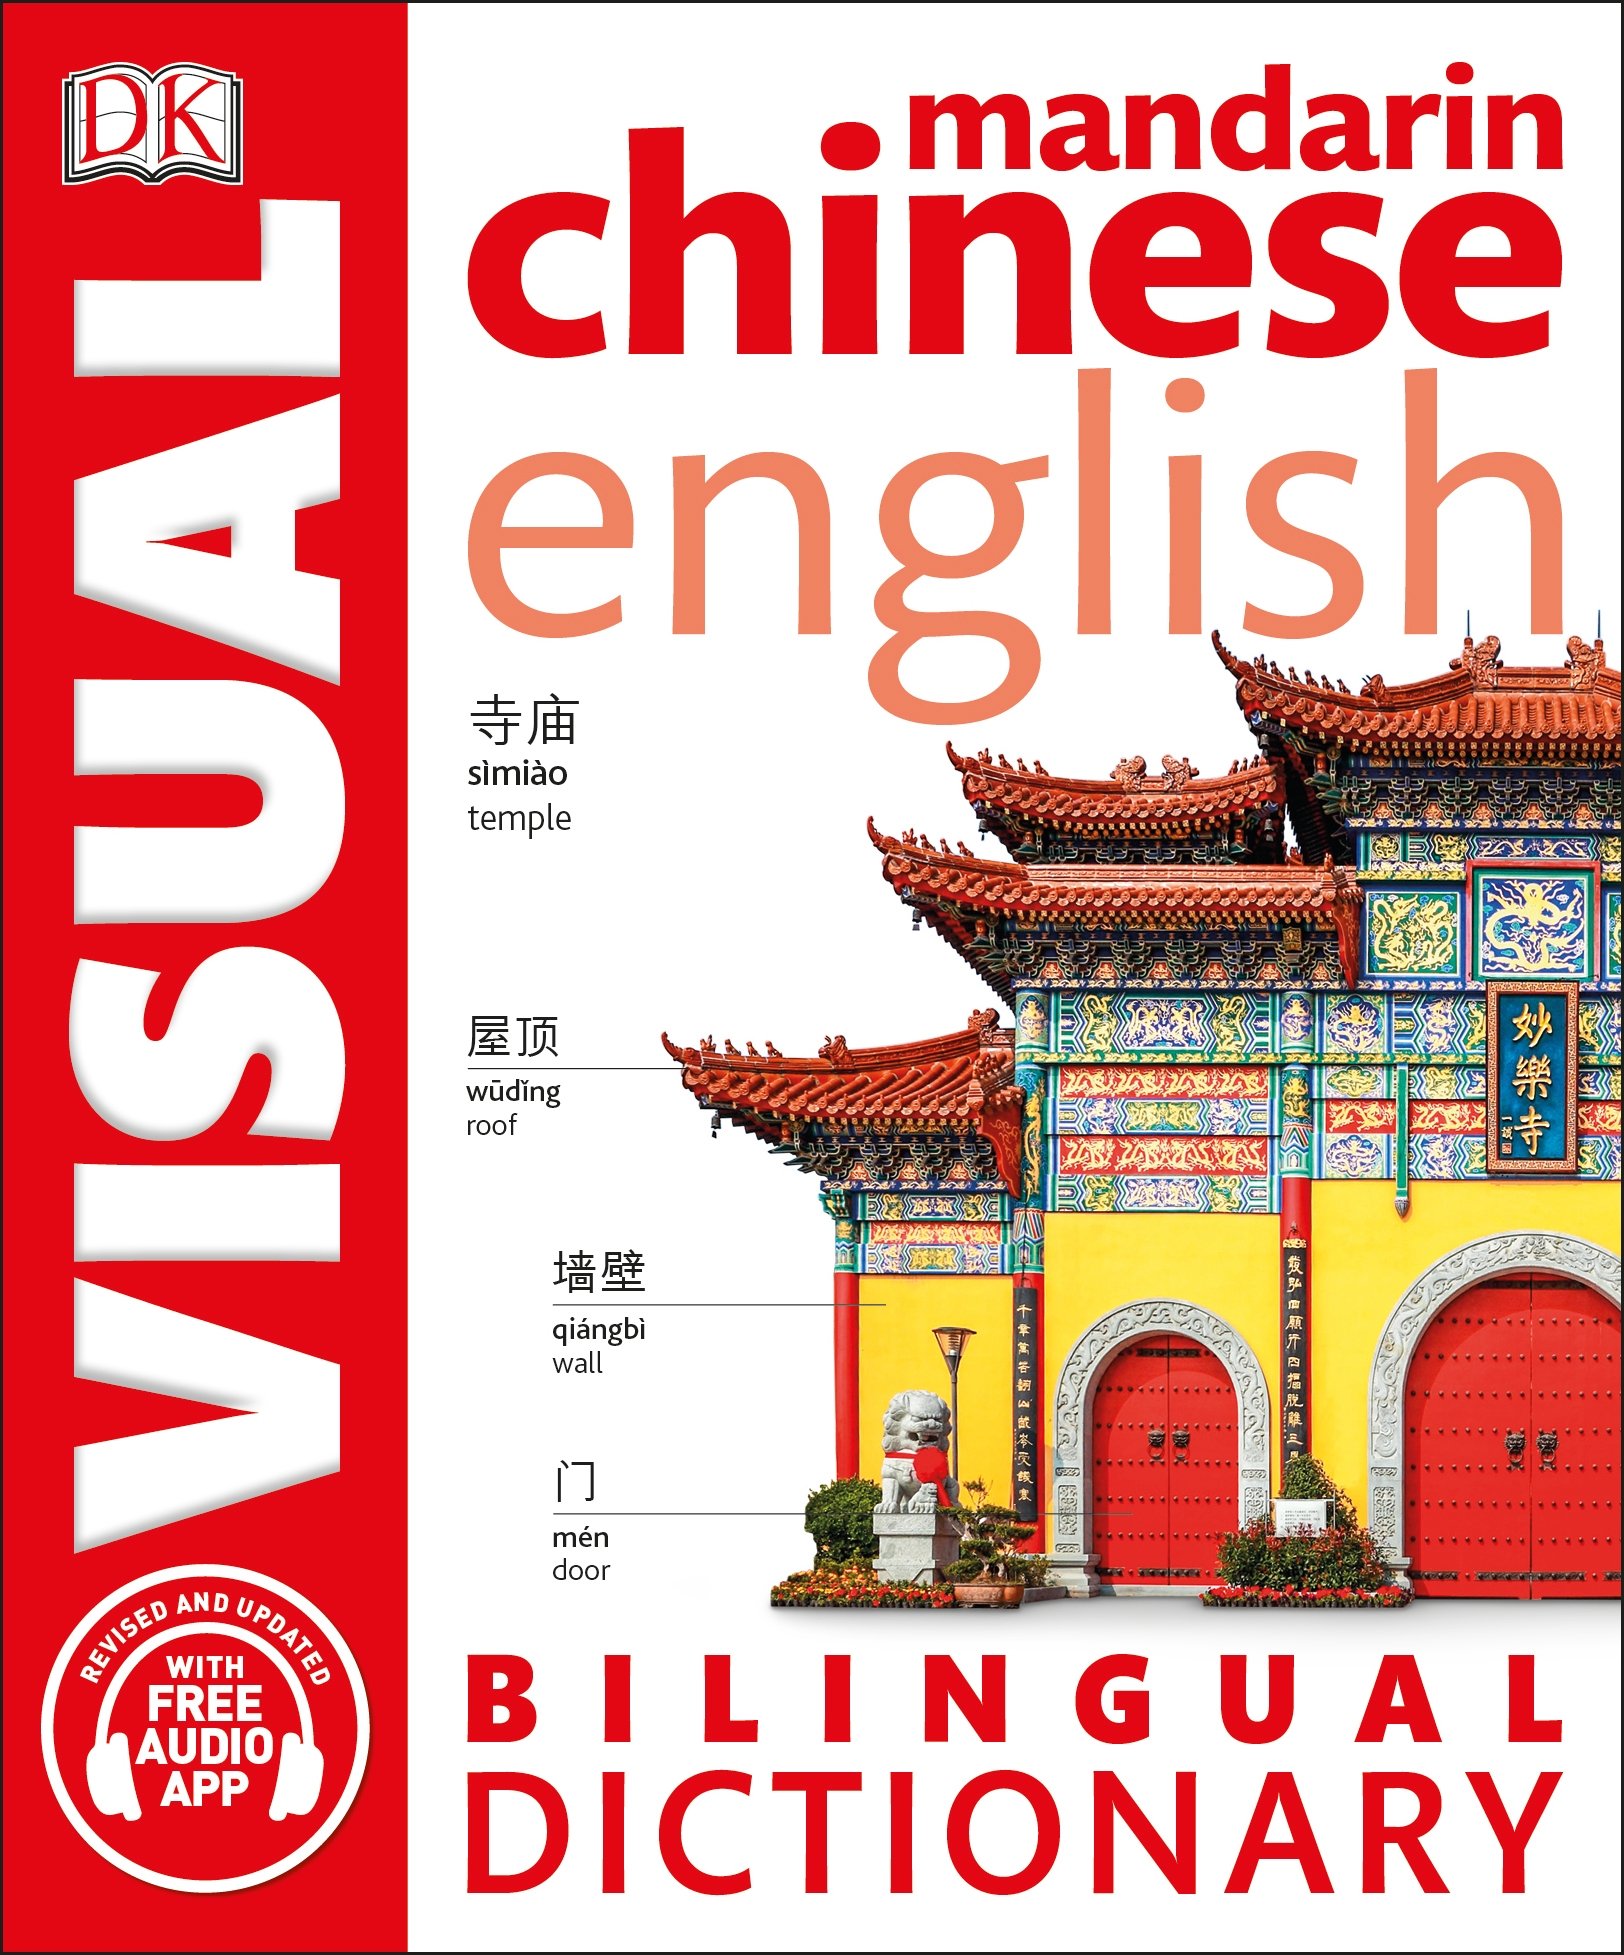 english to chinese dictionary free download pdf